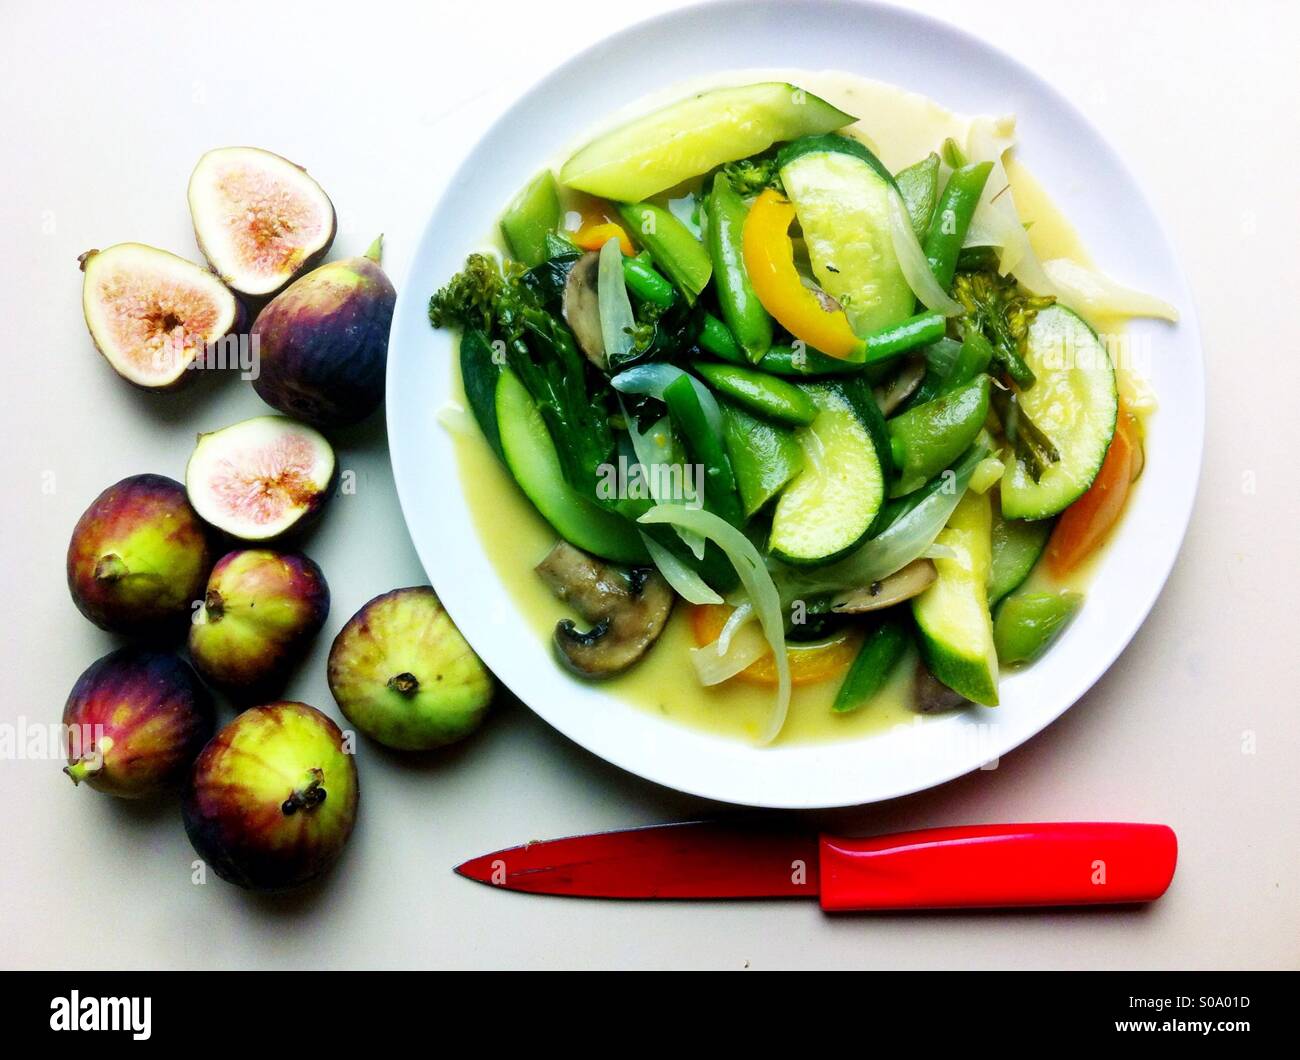 Vegan meal on white round plate with zucchini, bell peppers, onion, snow peas and fresh figs accompanied by the red paring knife Stock Photo